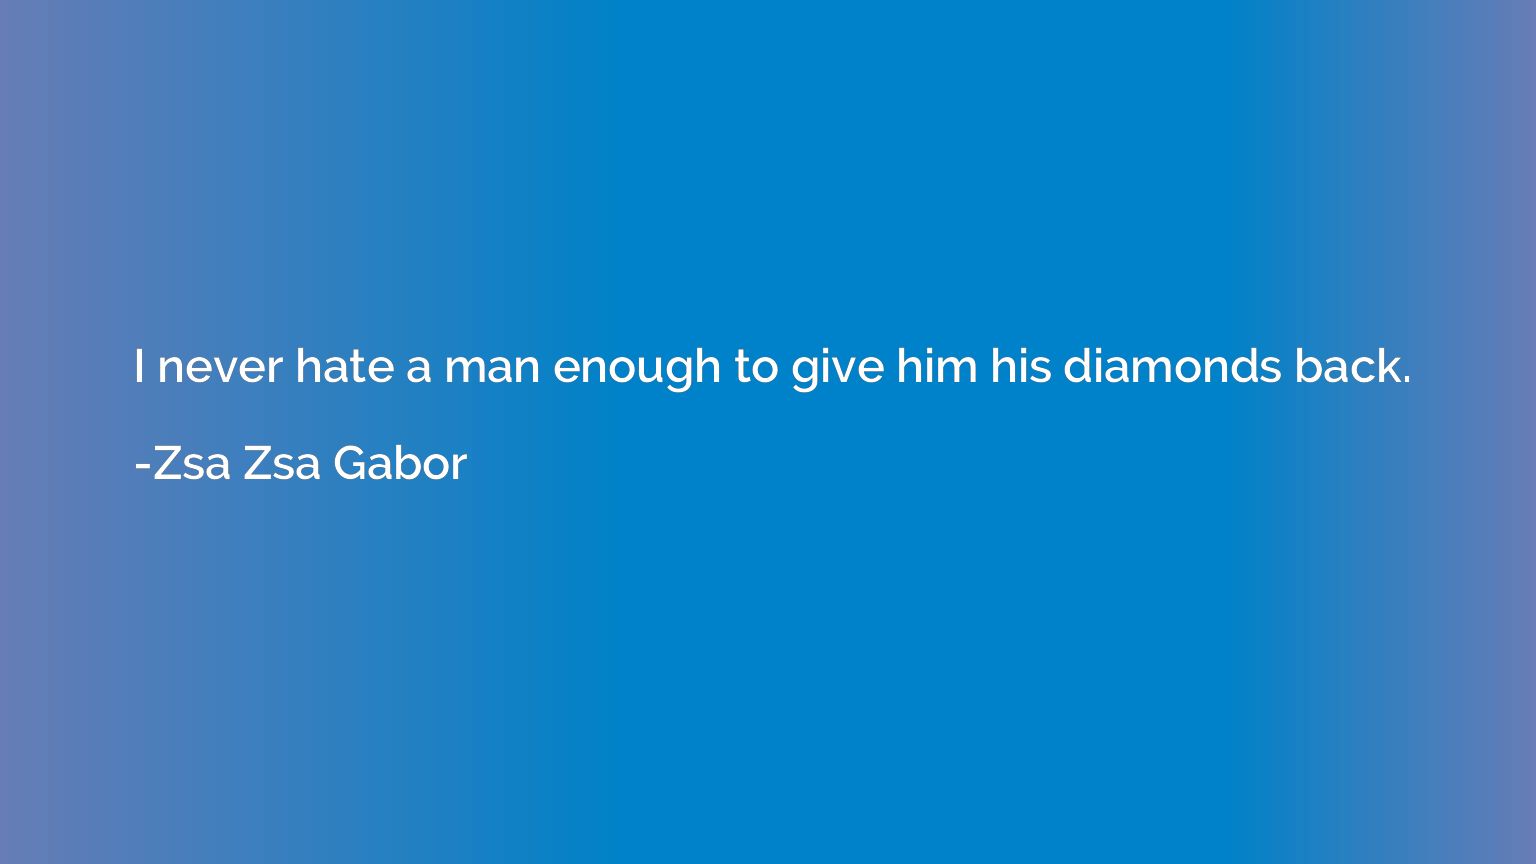 I never hate a man enough to give him his diamonds back.